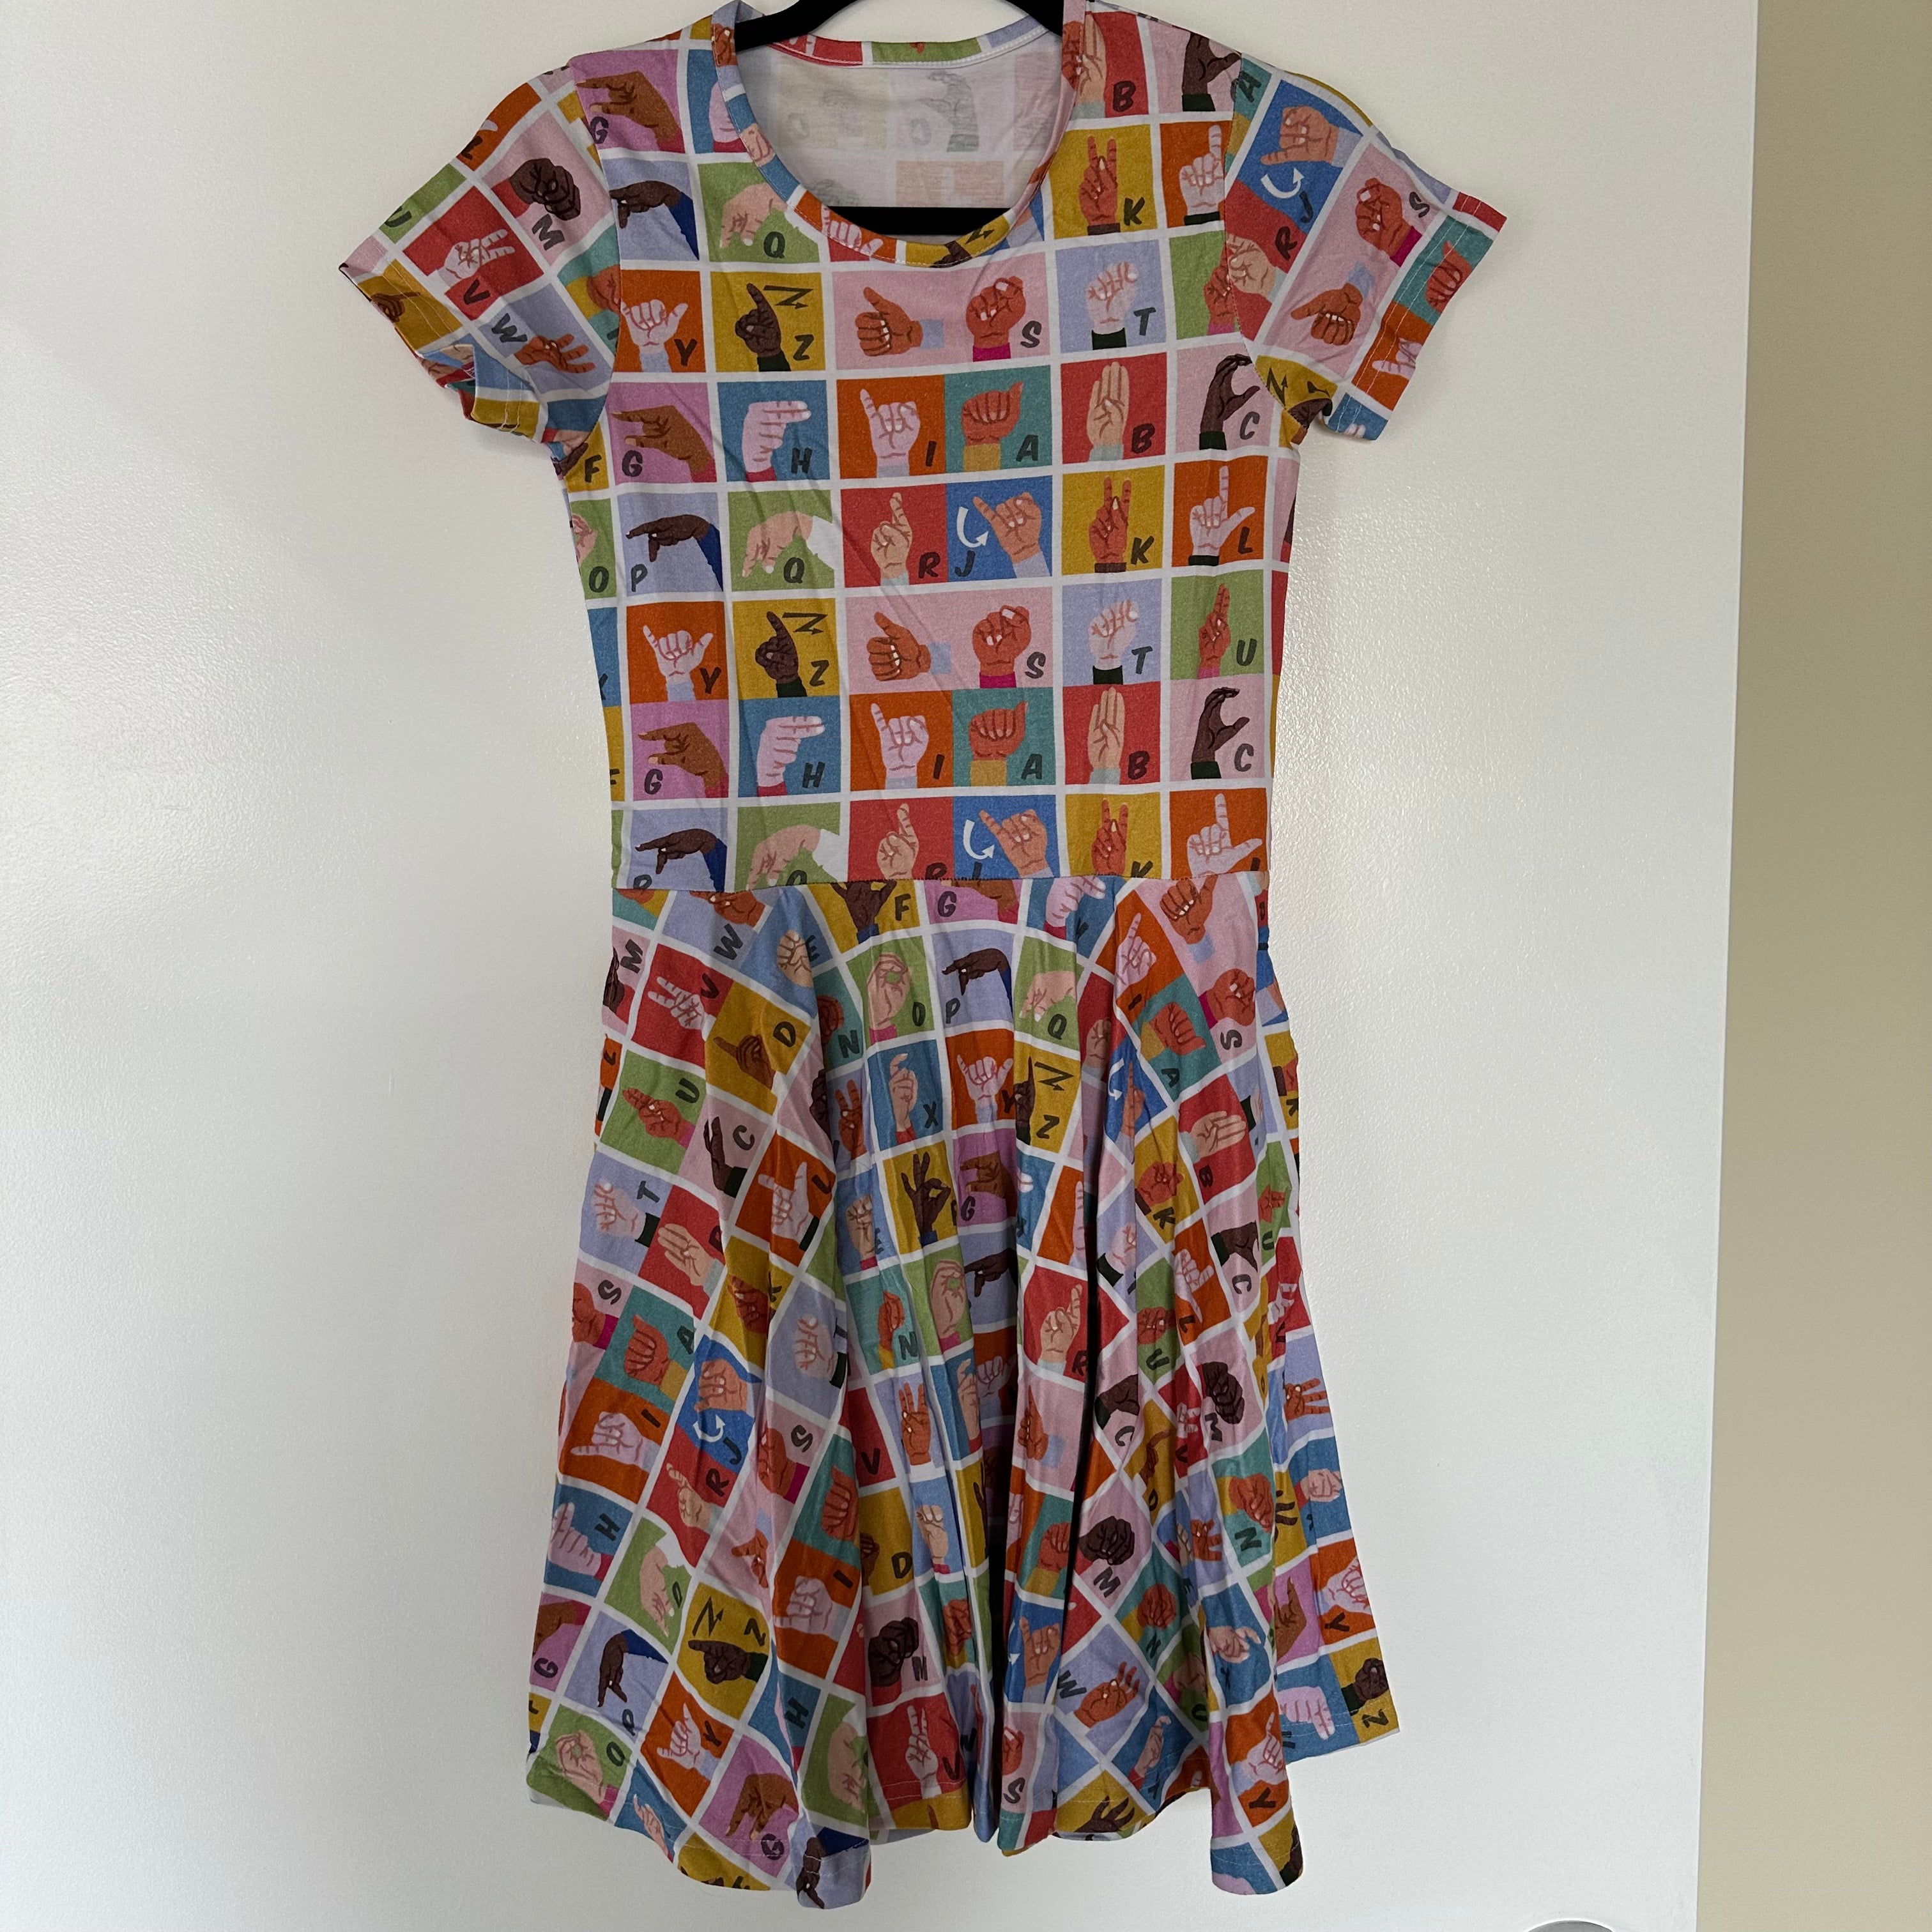 Sign Language Kids Dress Sample (Muted Colors) - 11/12 YEARS